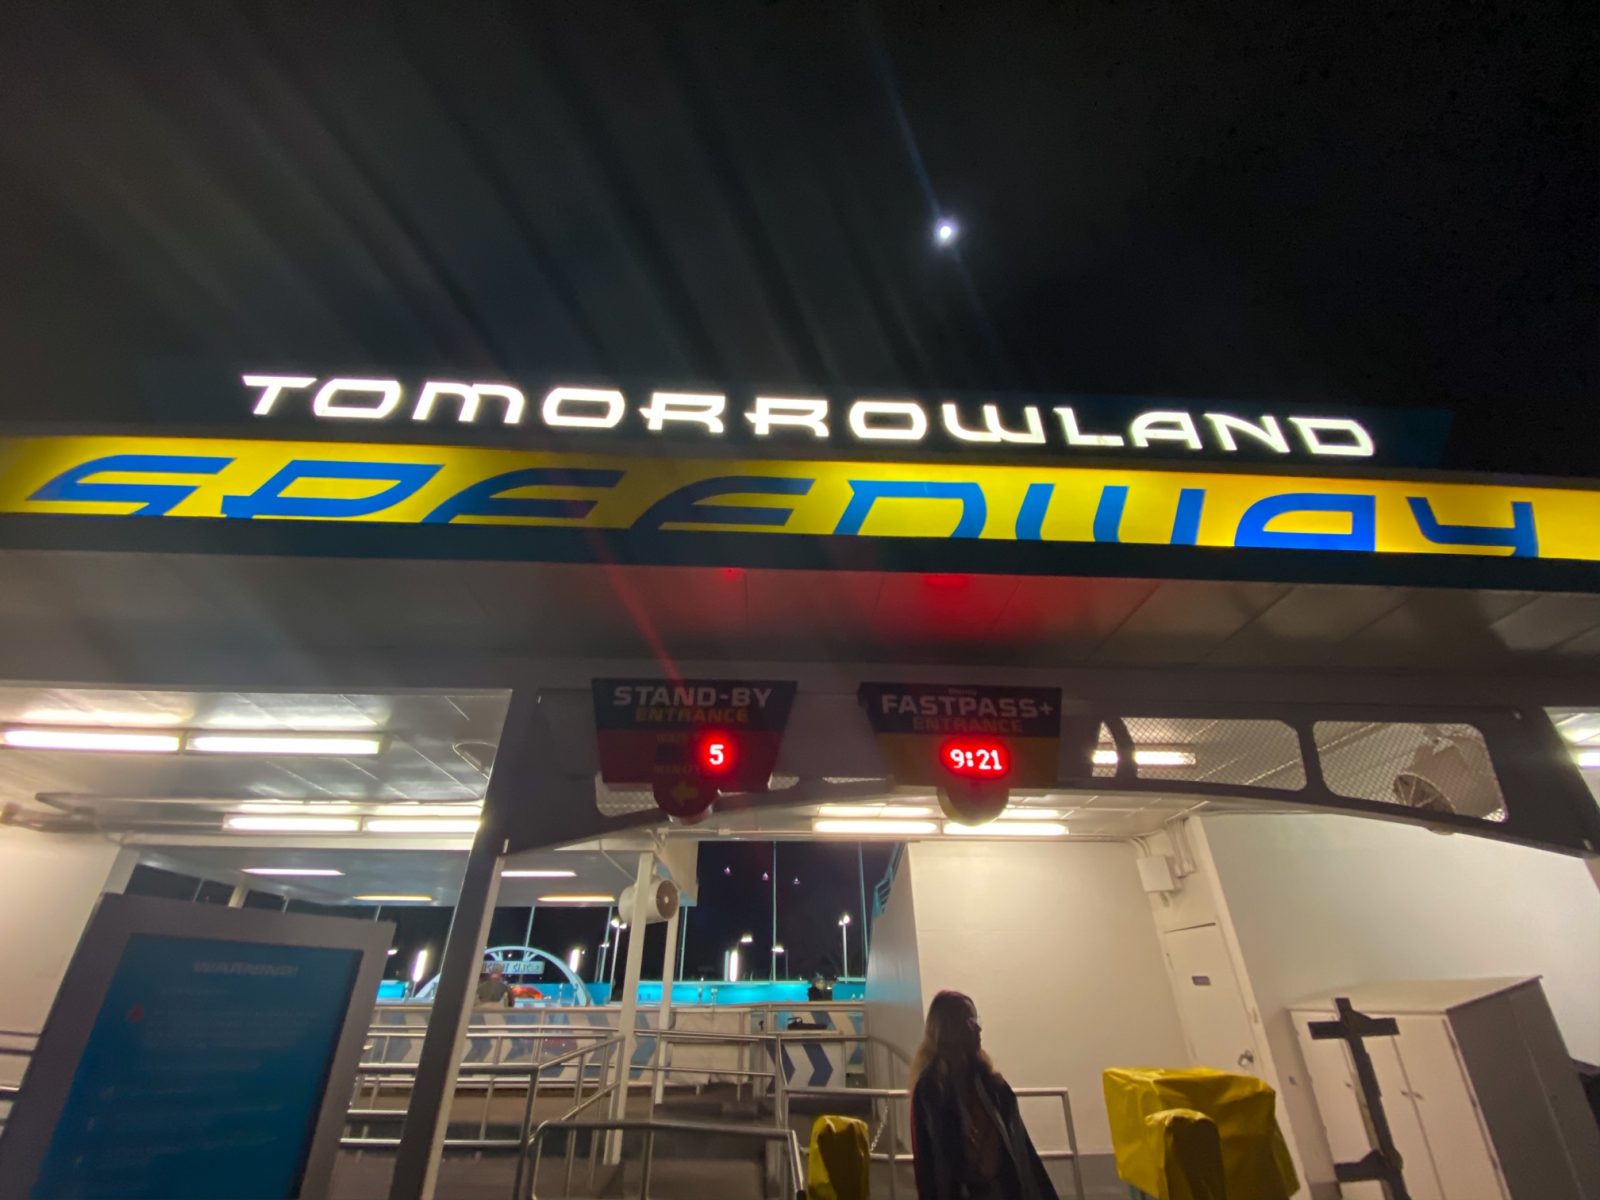 Tomorrowland Speedway with short wait time because of Villains after hours